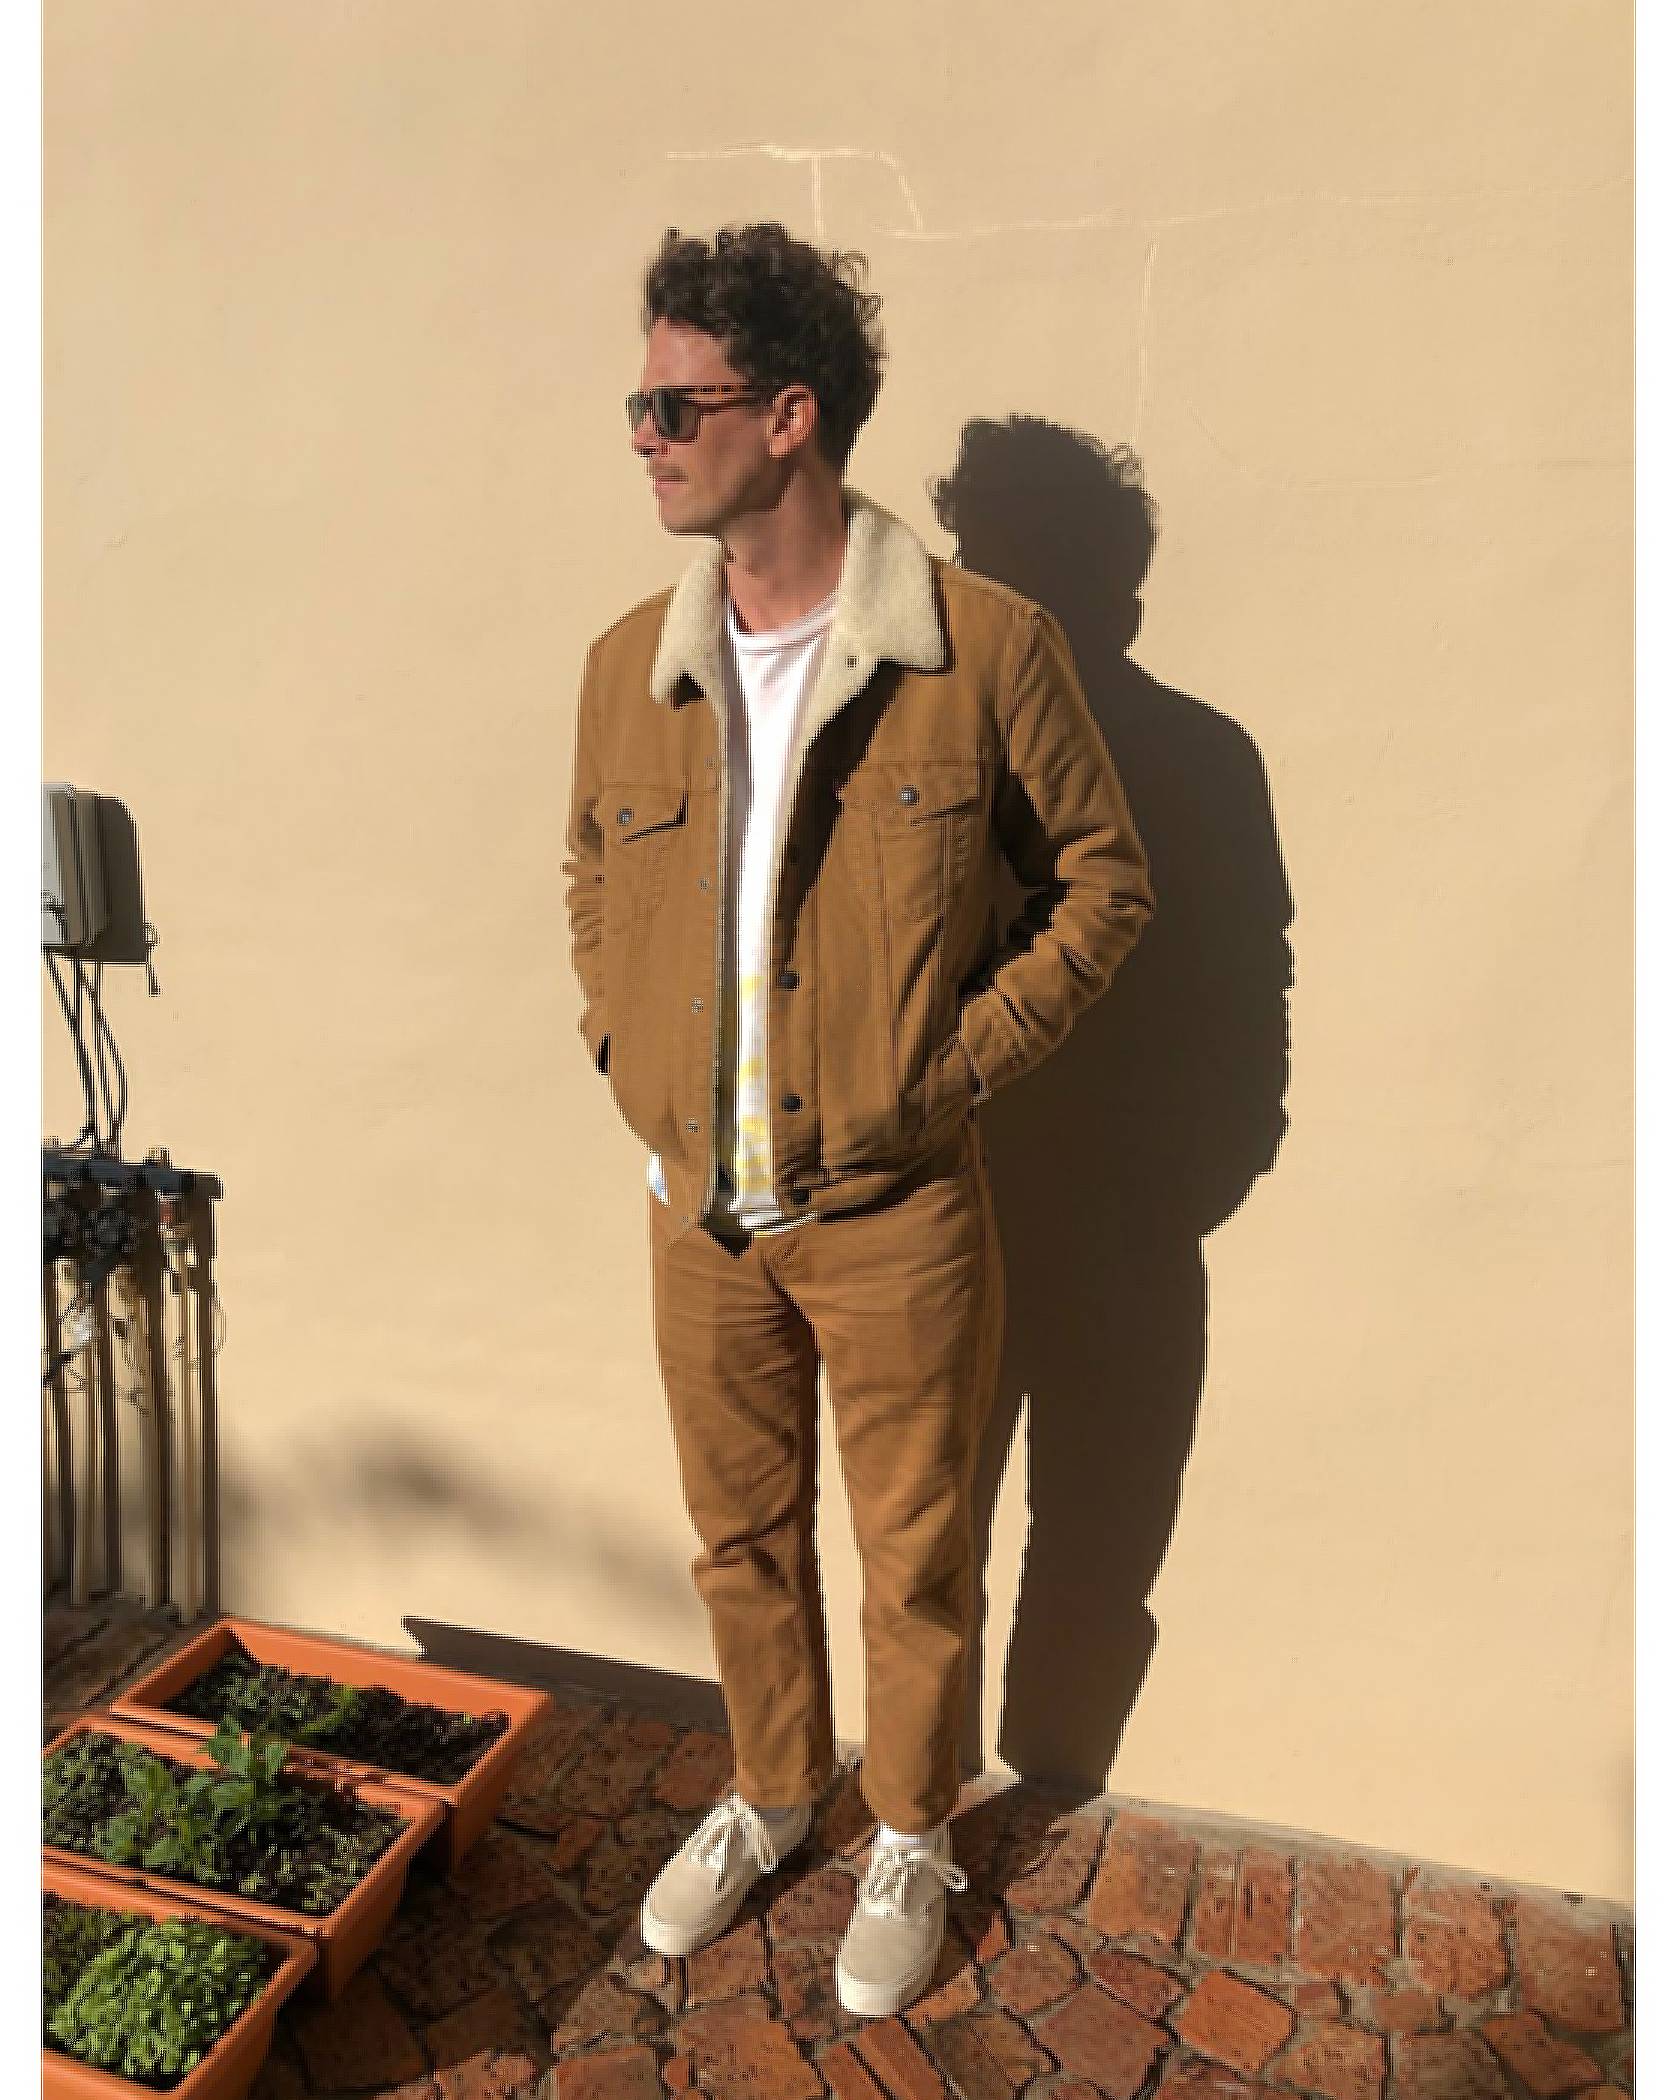 Photo of David Davey standing against a cream wall outside. He's wearing a brown corduroy jacket, a white tee, and tan 514s with tan sneakers.